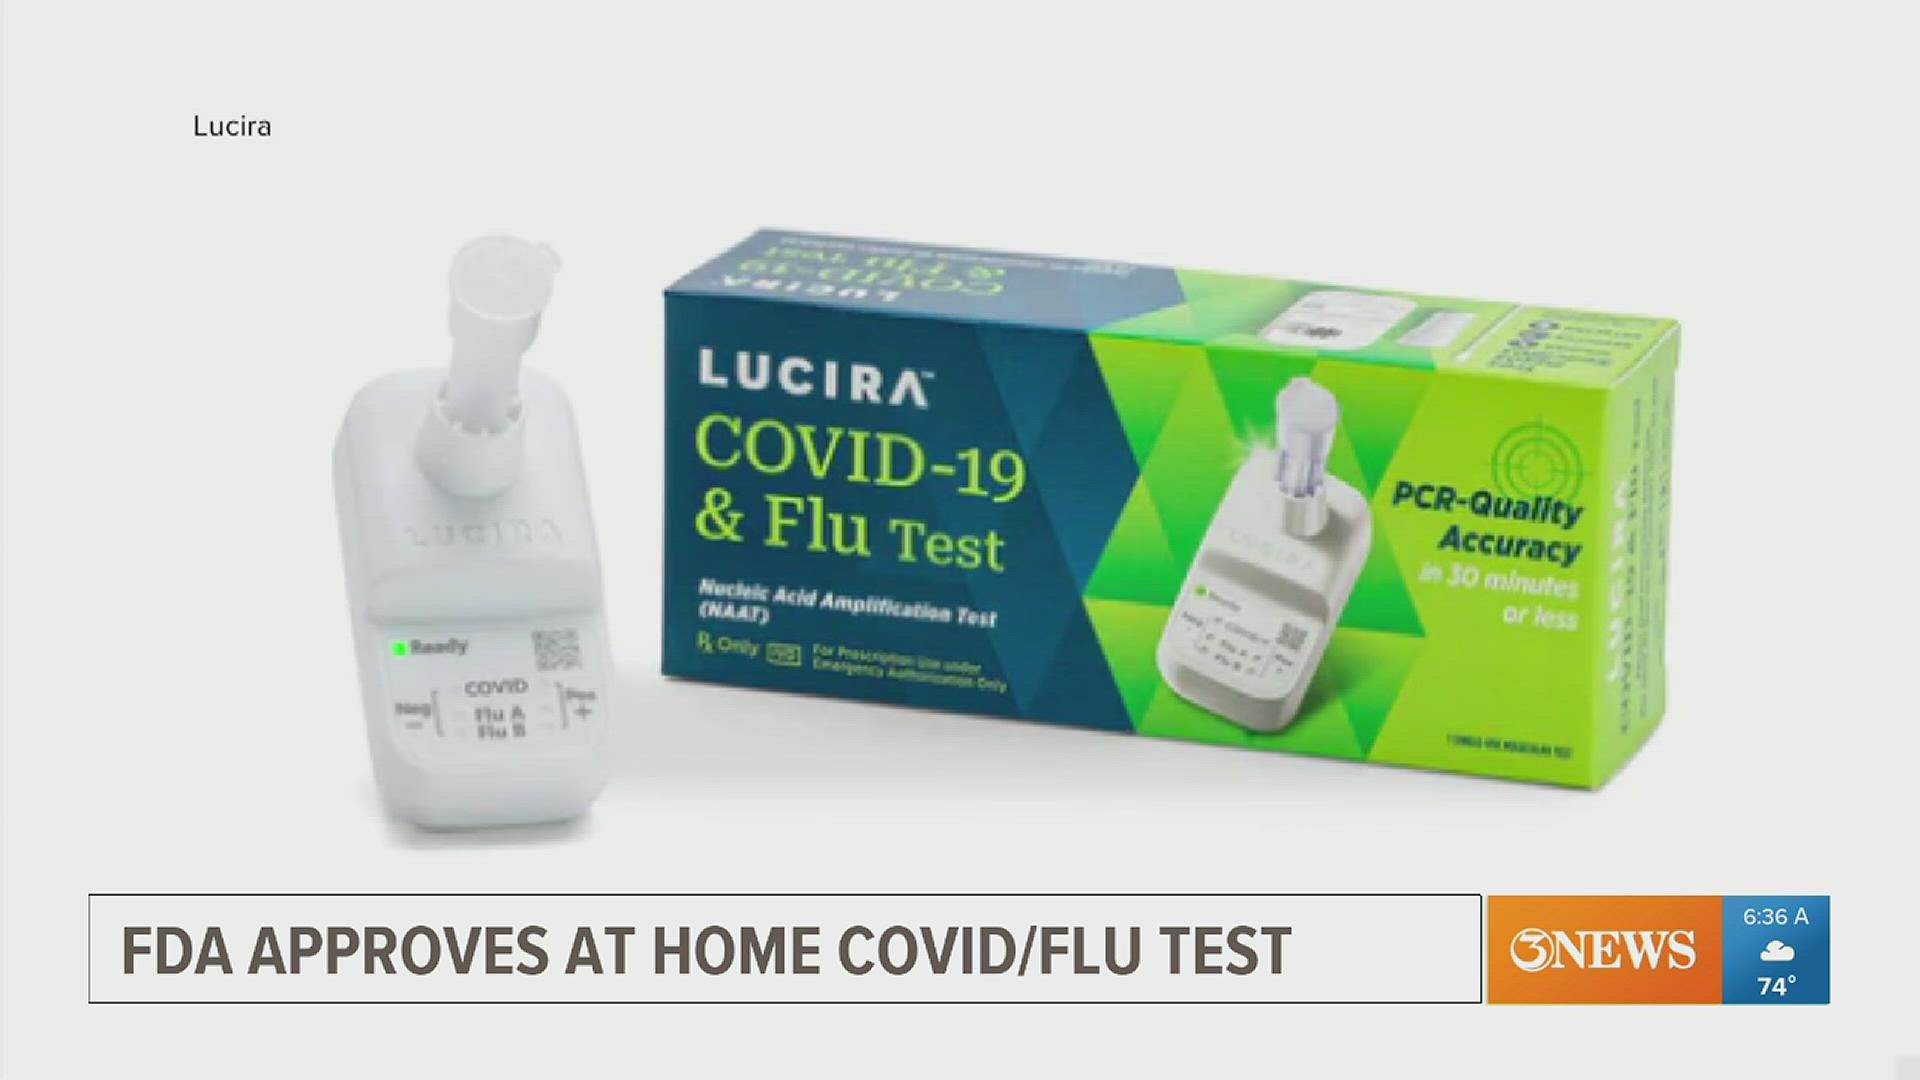 You will soon be able to test for COVID and the flu at the same time with one home test.